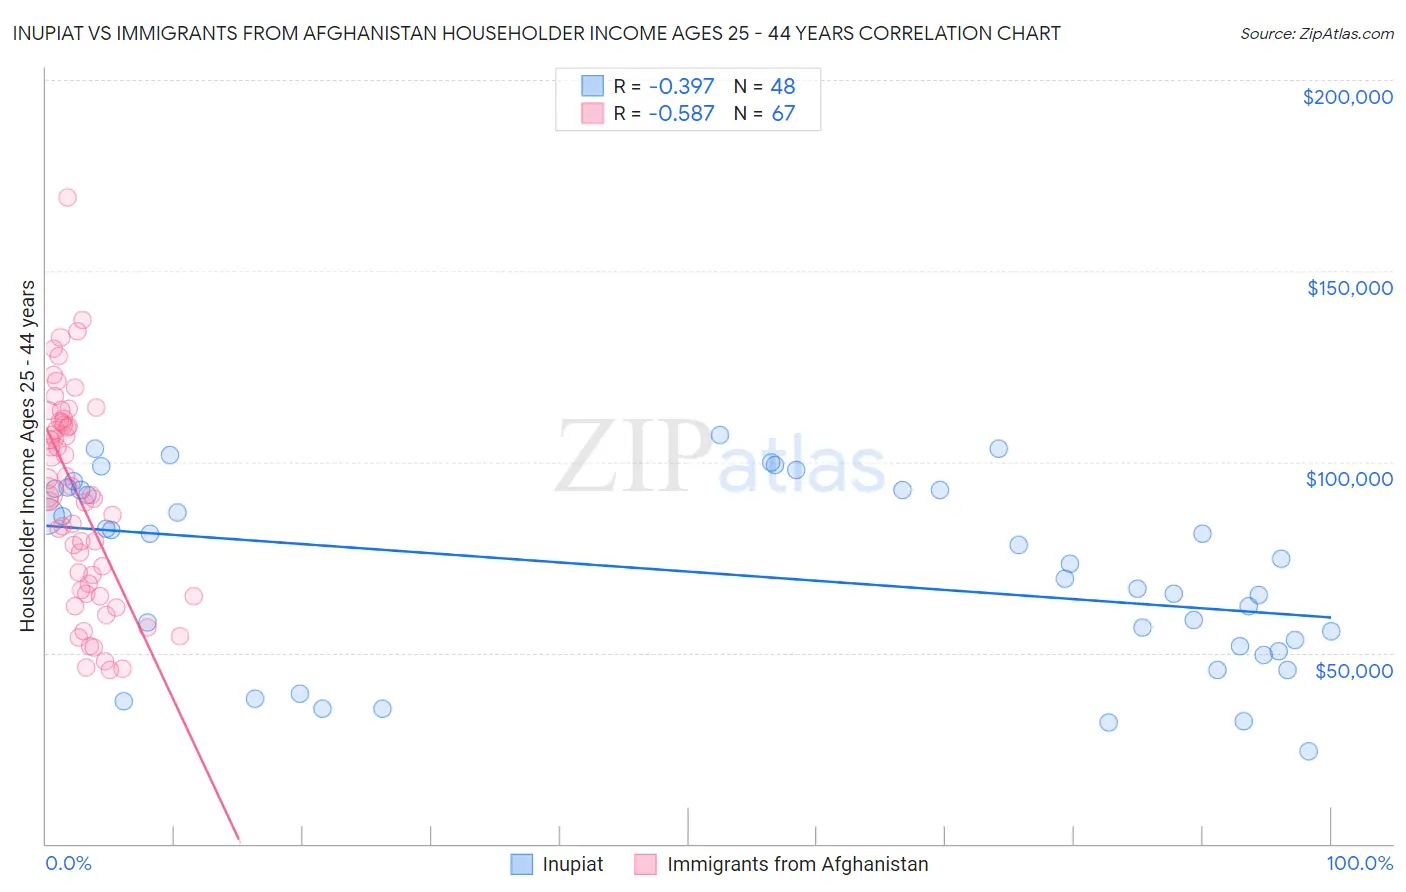 Inupiat vs Immigrants from Afghanistan Householder Income Ages 25 - 44 years